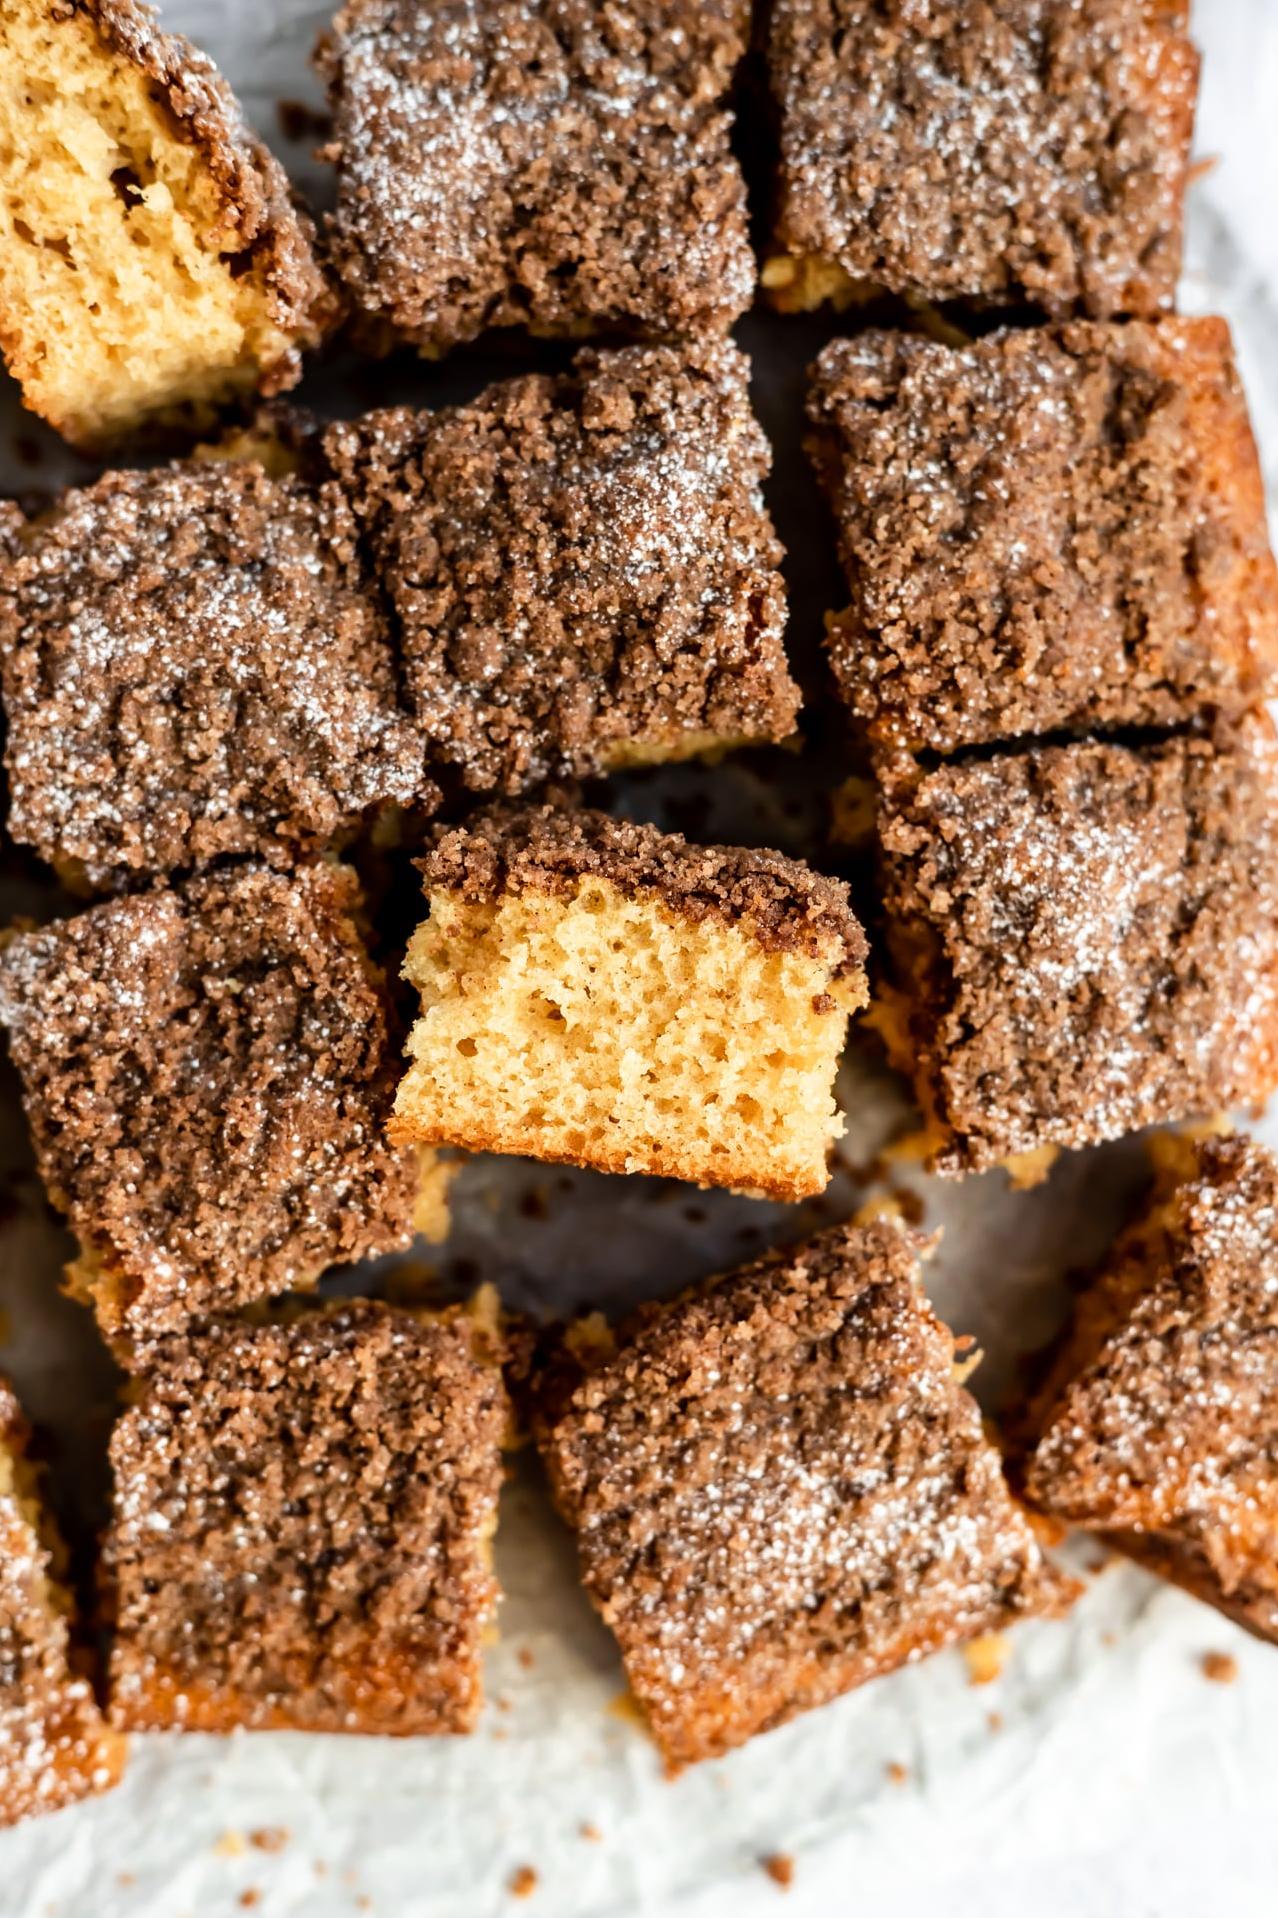  This recipe is a healthier twist on the classic coffee cake, without sacrificing on taste